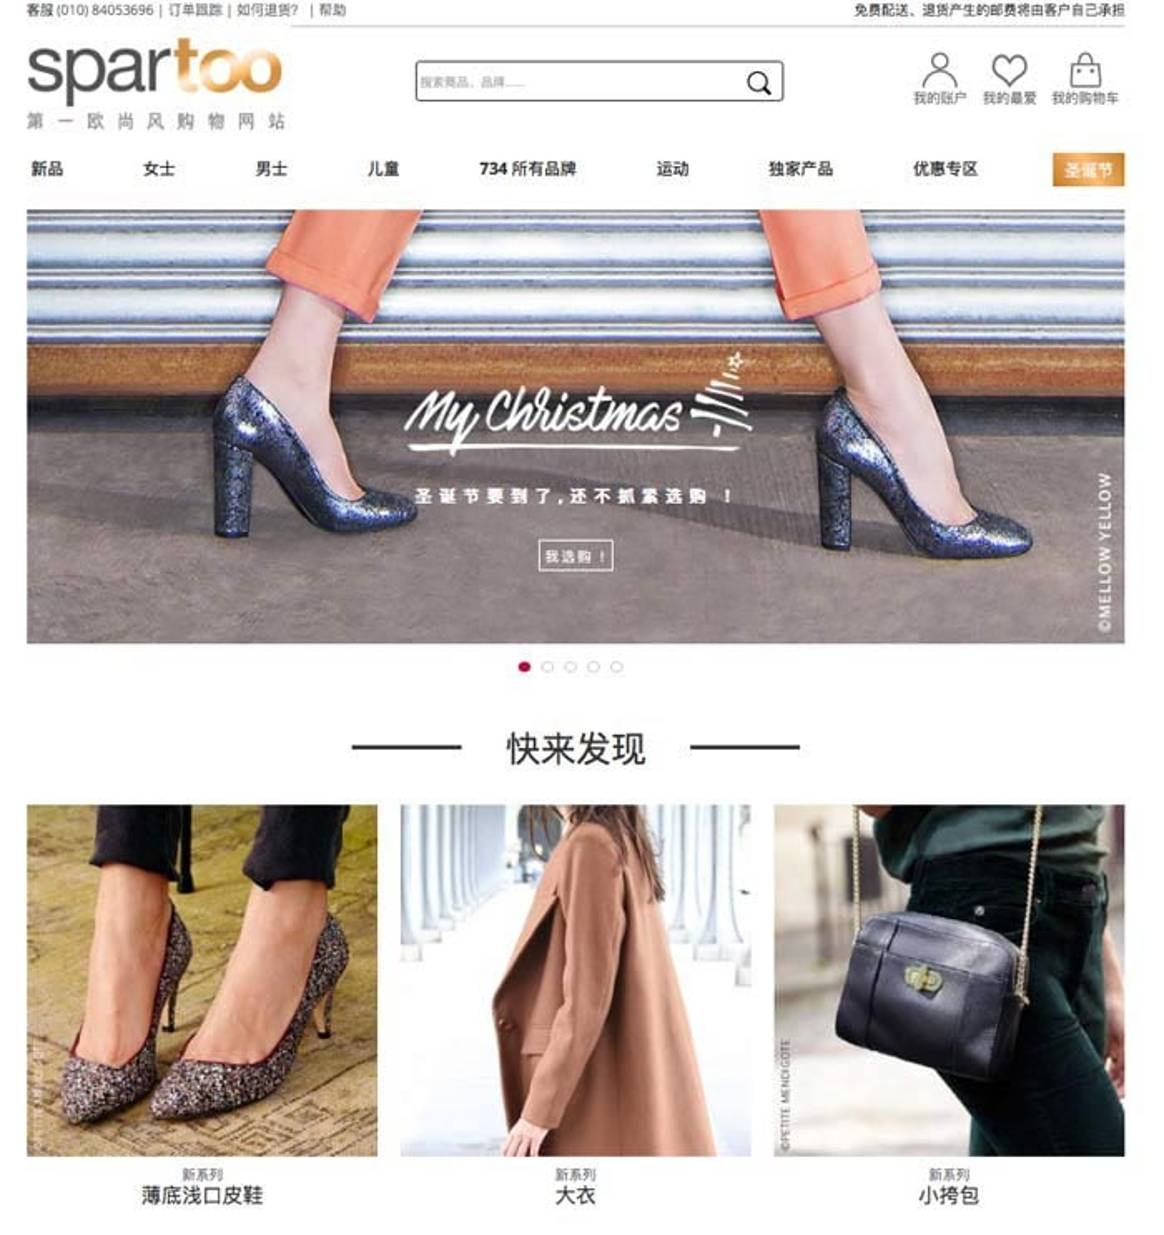 Spartoo launches Chinese website